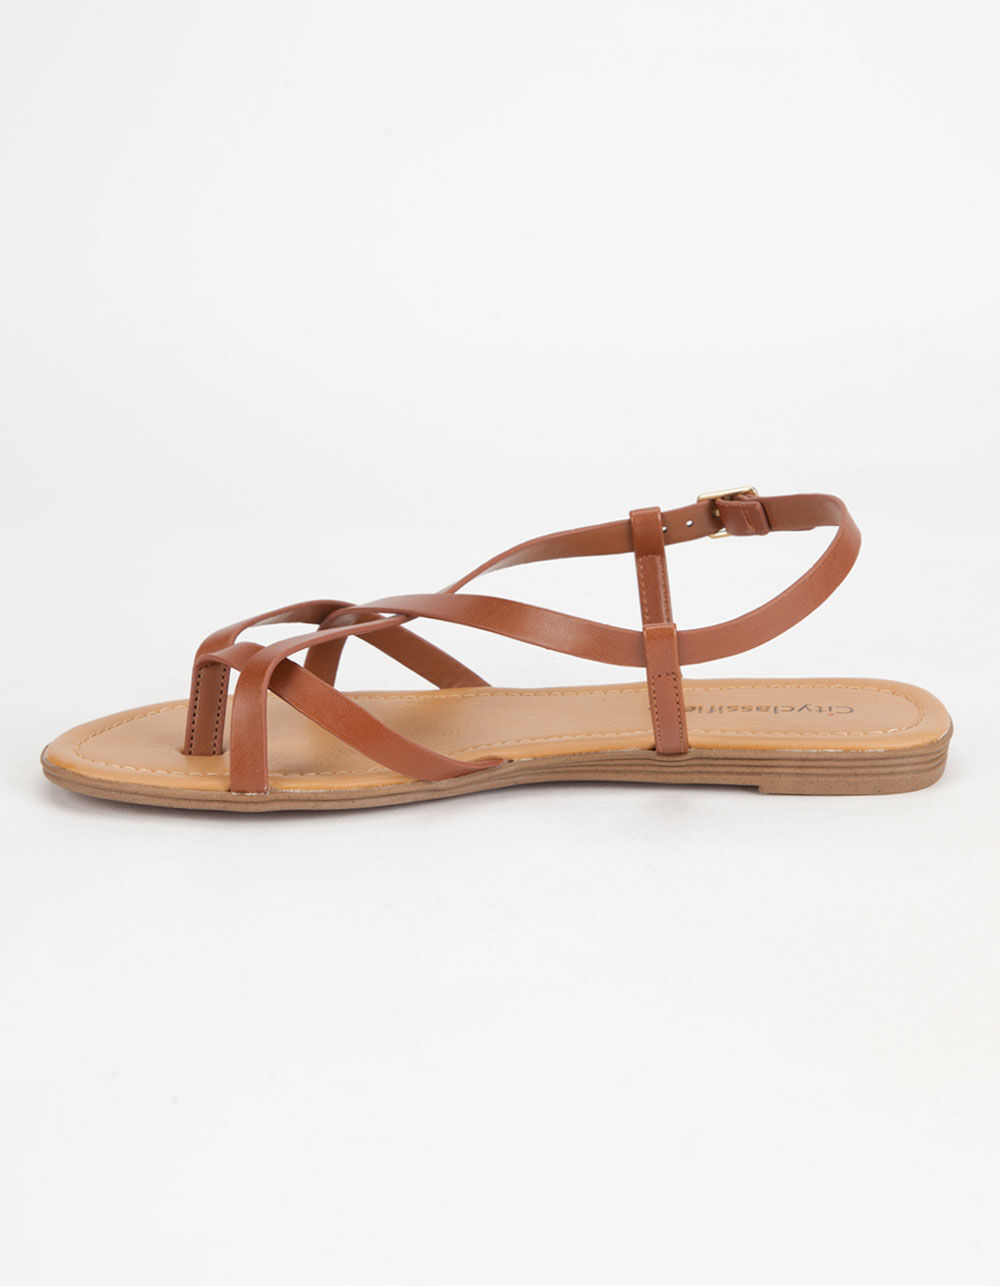 CITY CLASSIFIED Spica Womens Sandals image number 2